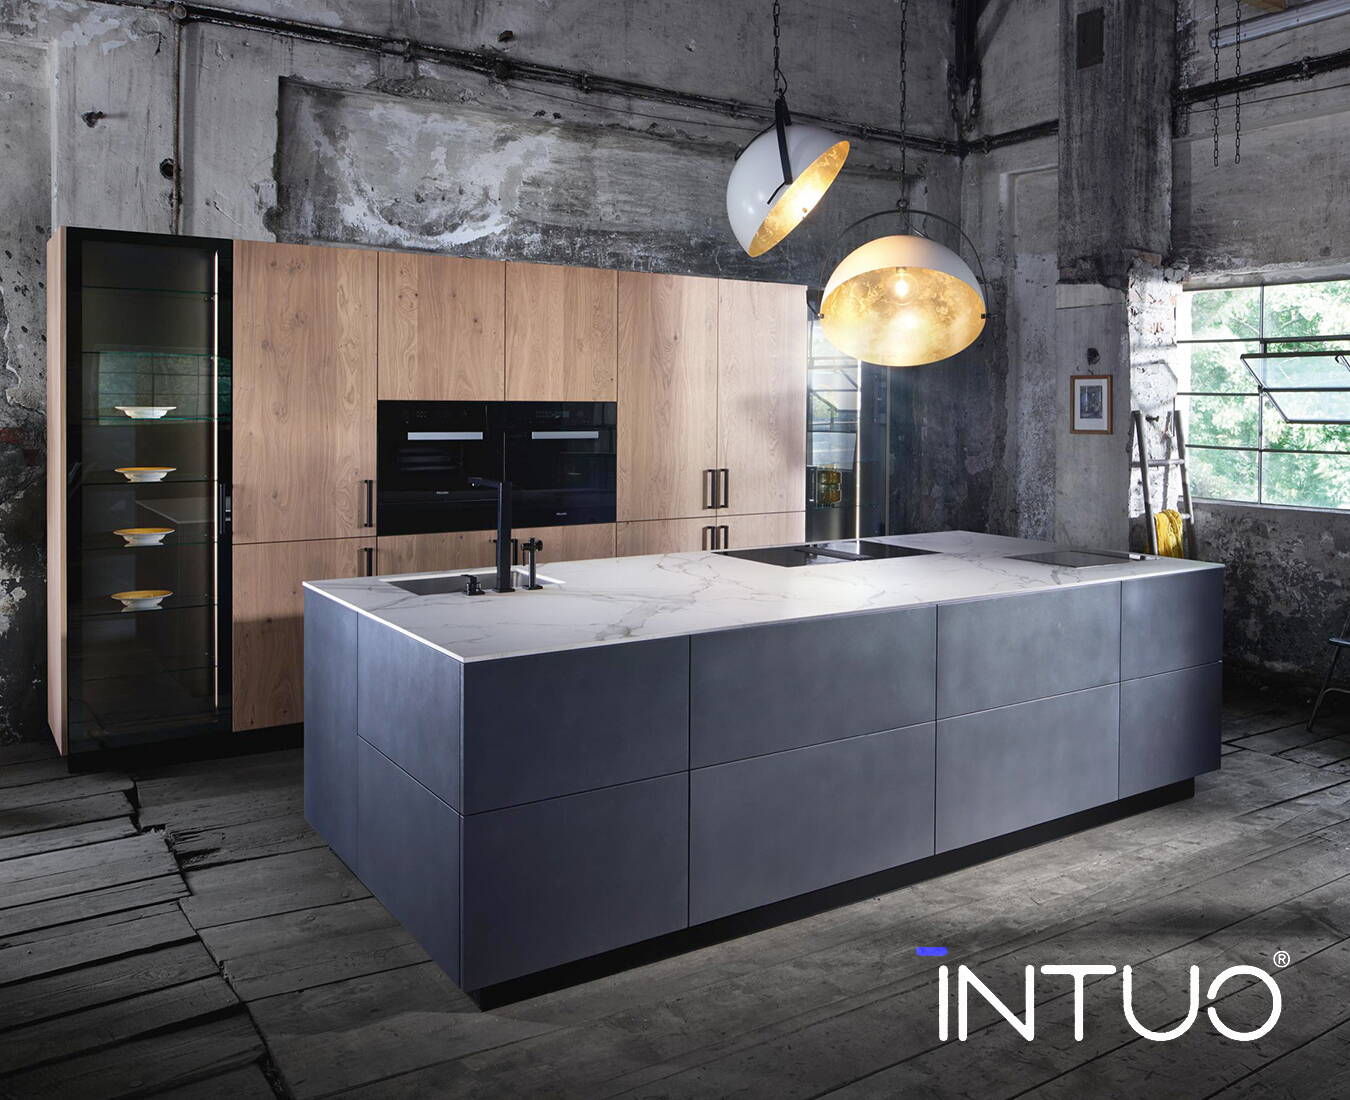 Intuo kitchens